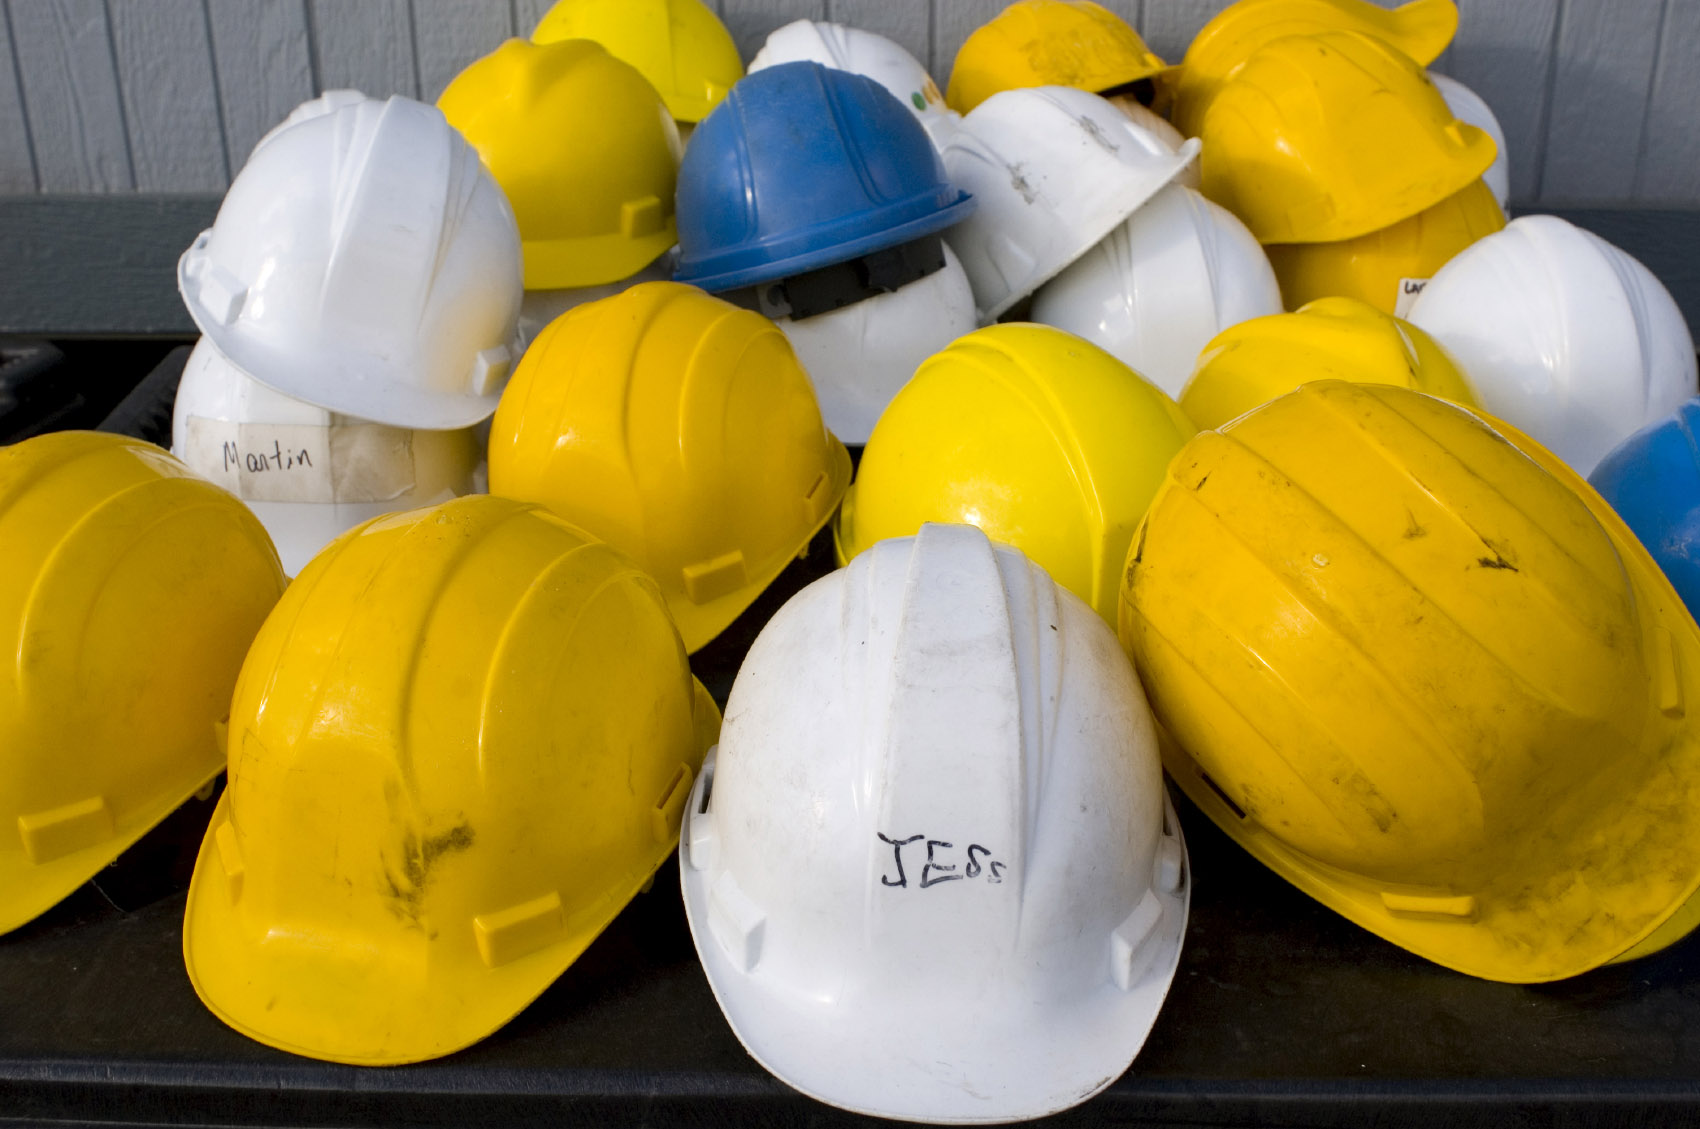 Construction Industry faces Labor Shortages